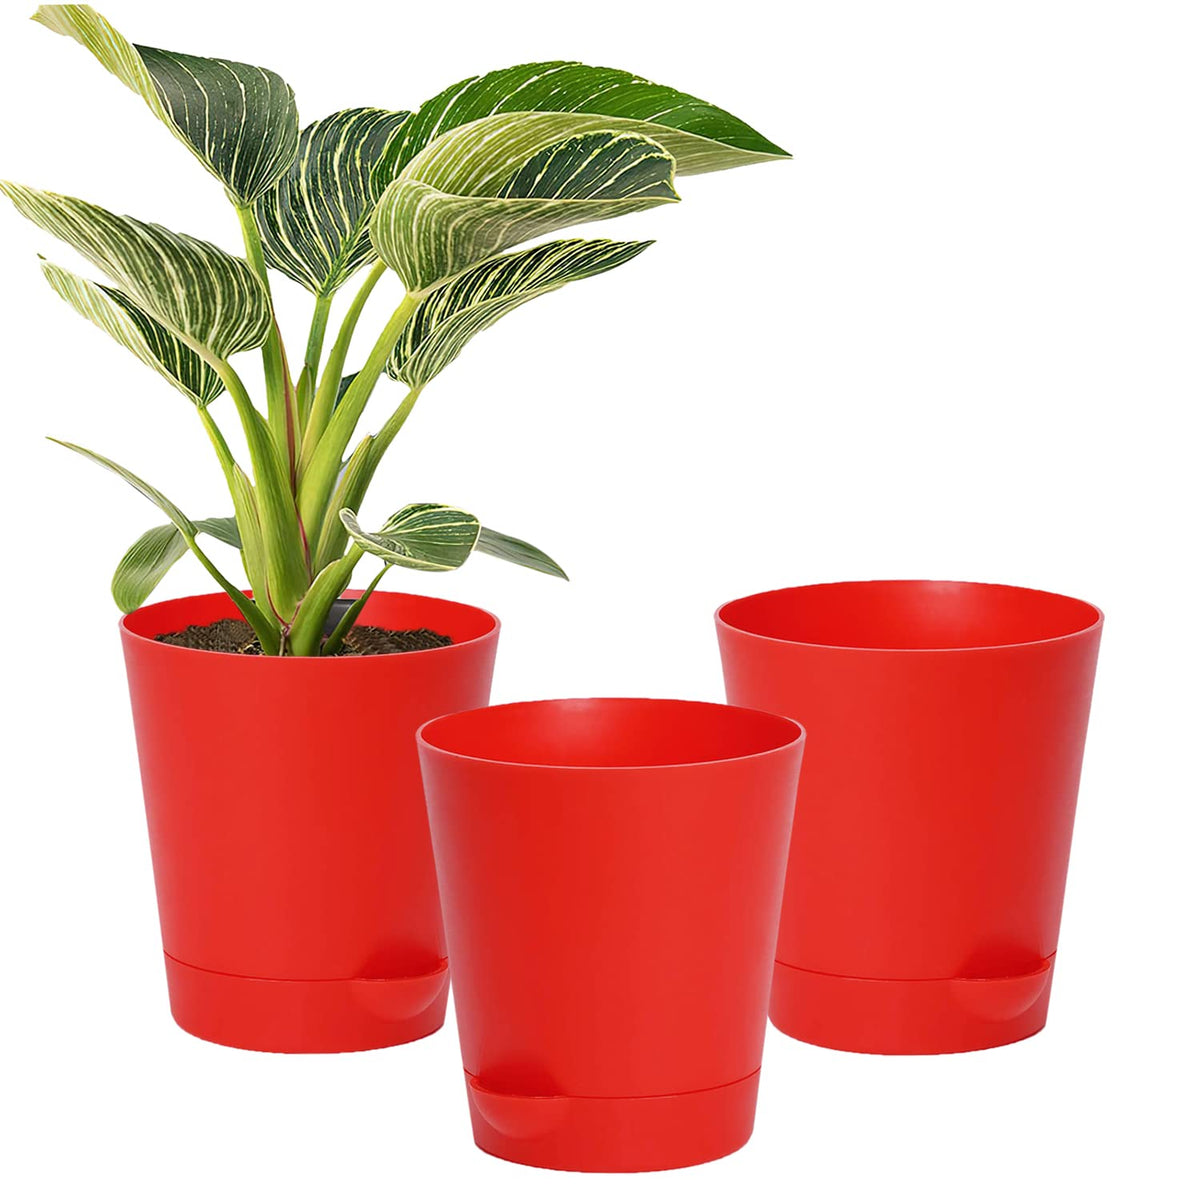 Kuber Industries Plastic Titan Pot|Garden Container for Plants & Flowers|Self-Watering Pot with Drainage Holes,6 Inch,Pack of 3 (Red)